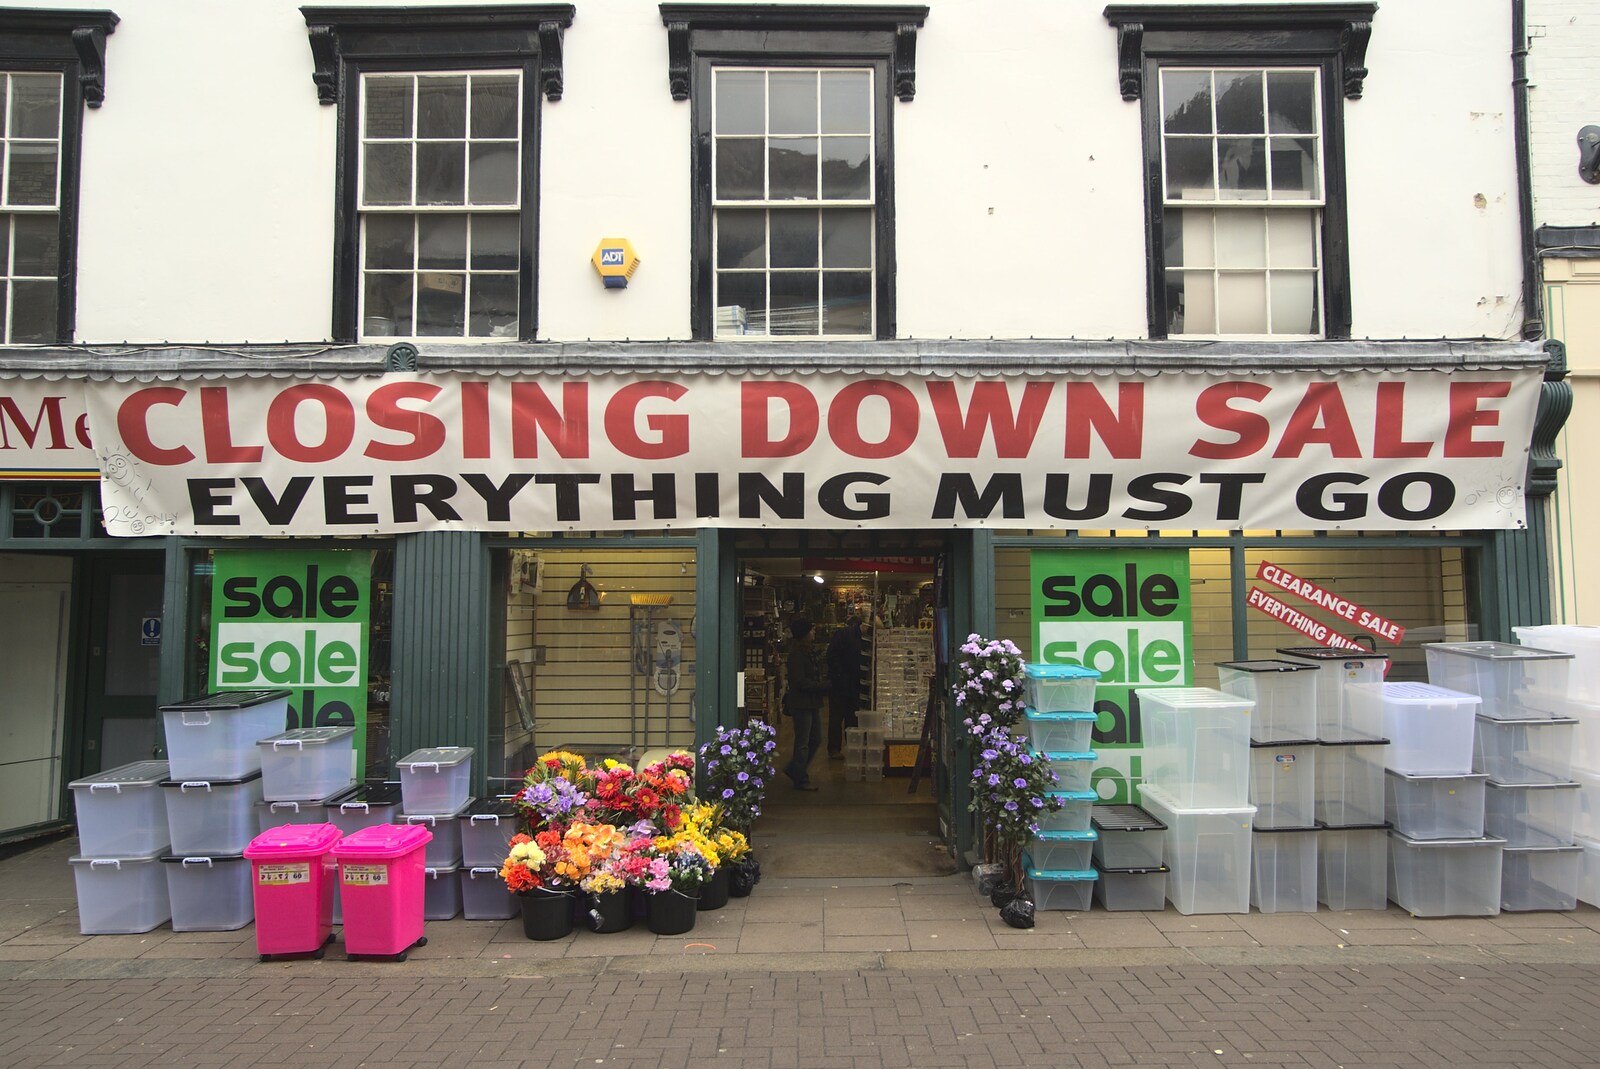 Classic closing-down sign: everything must go from Pizza in Bury St. Edmunds, Suffolk - 30th January 2011